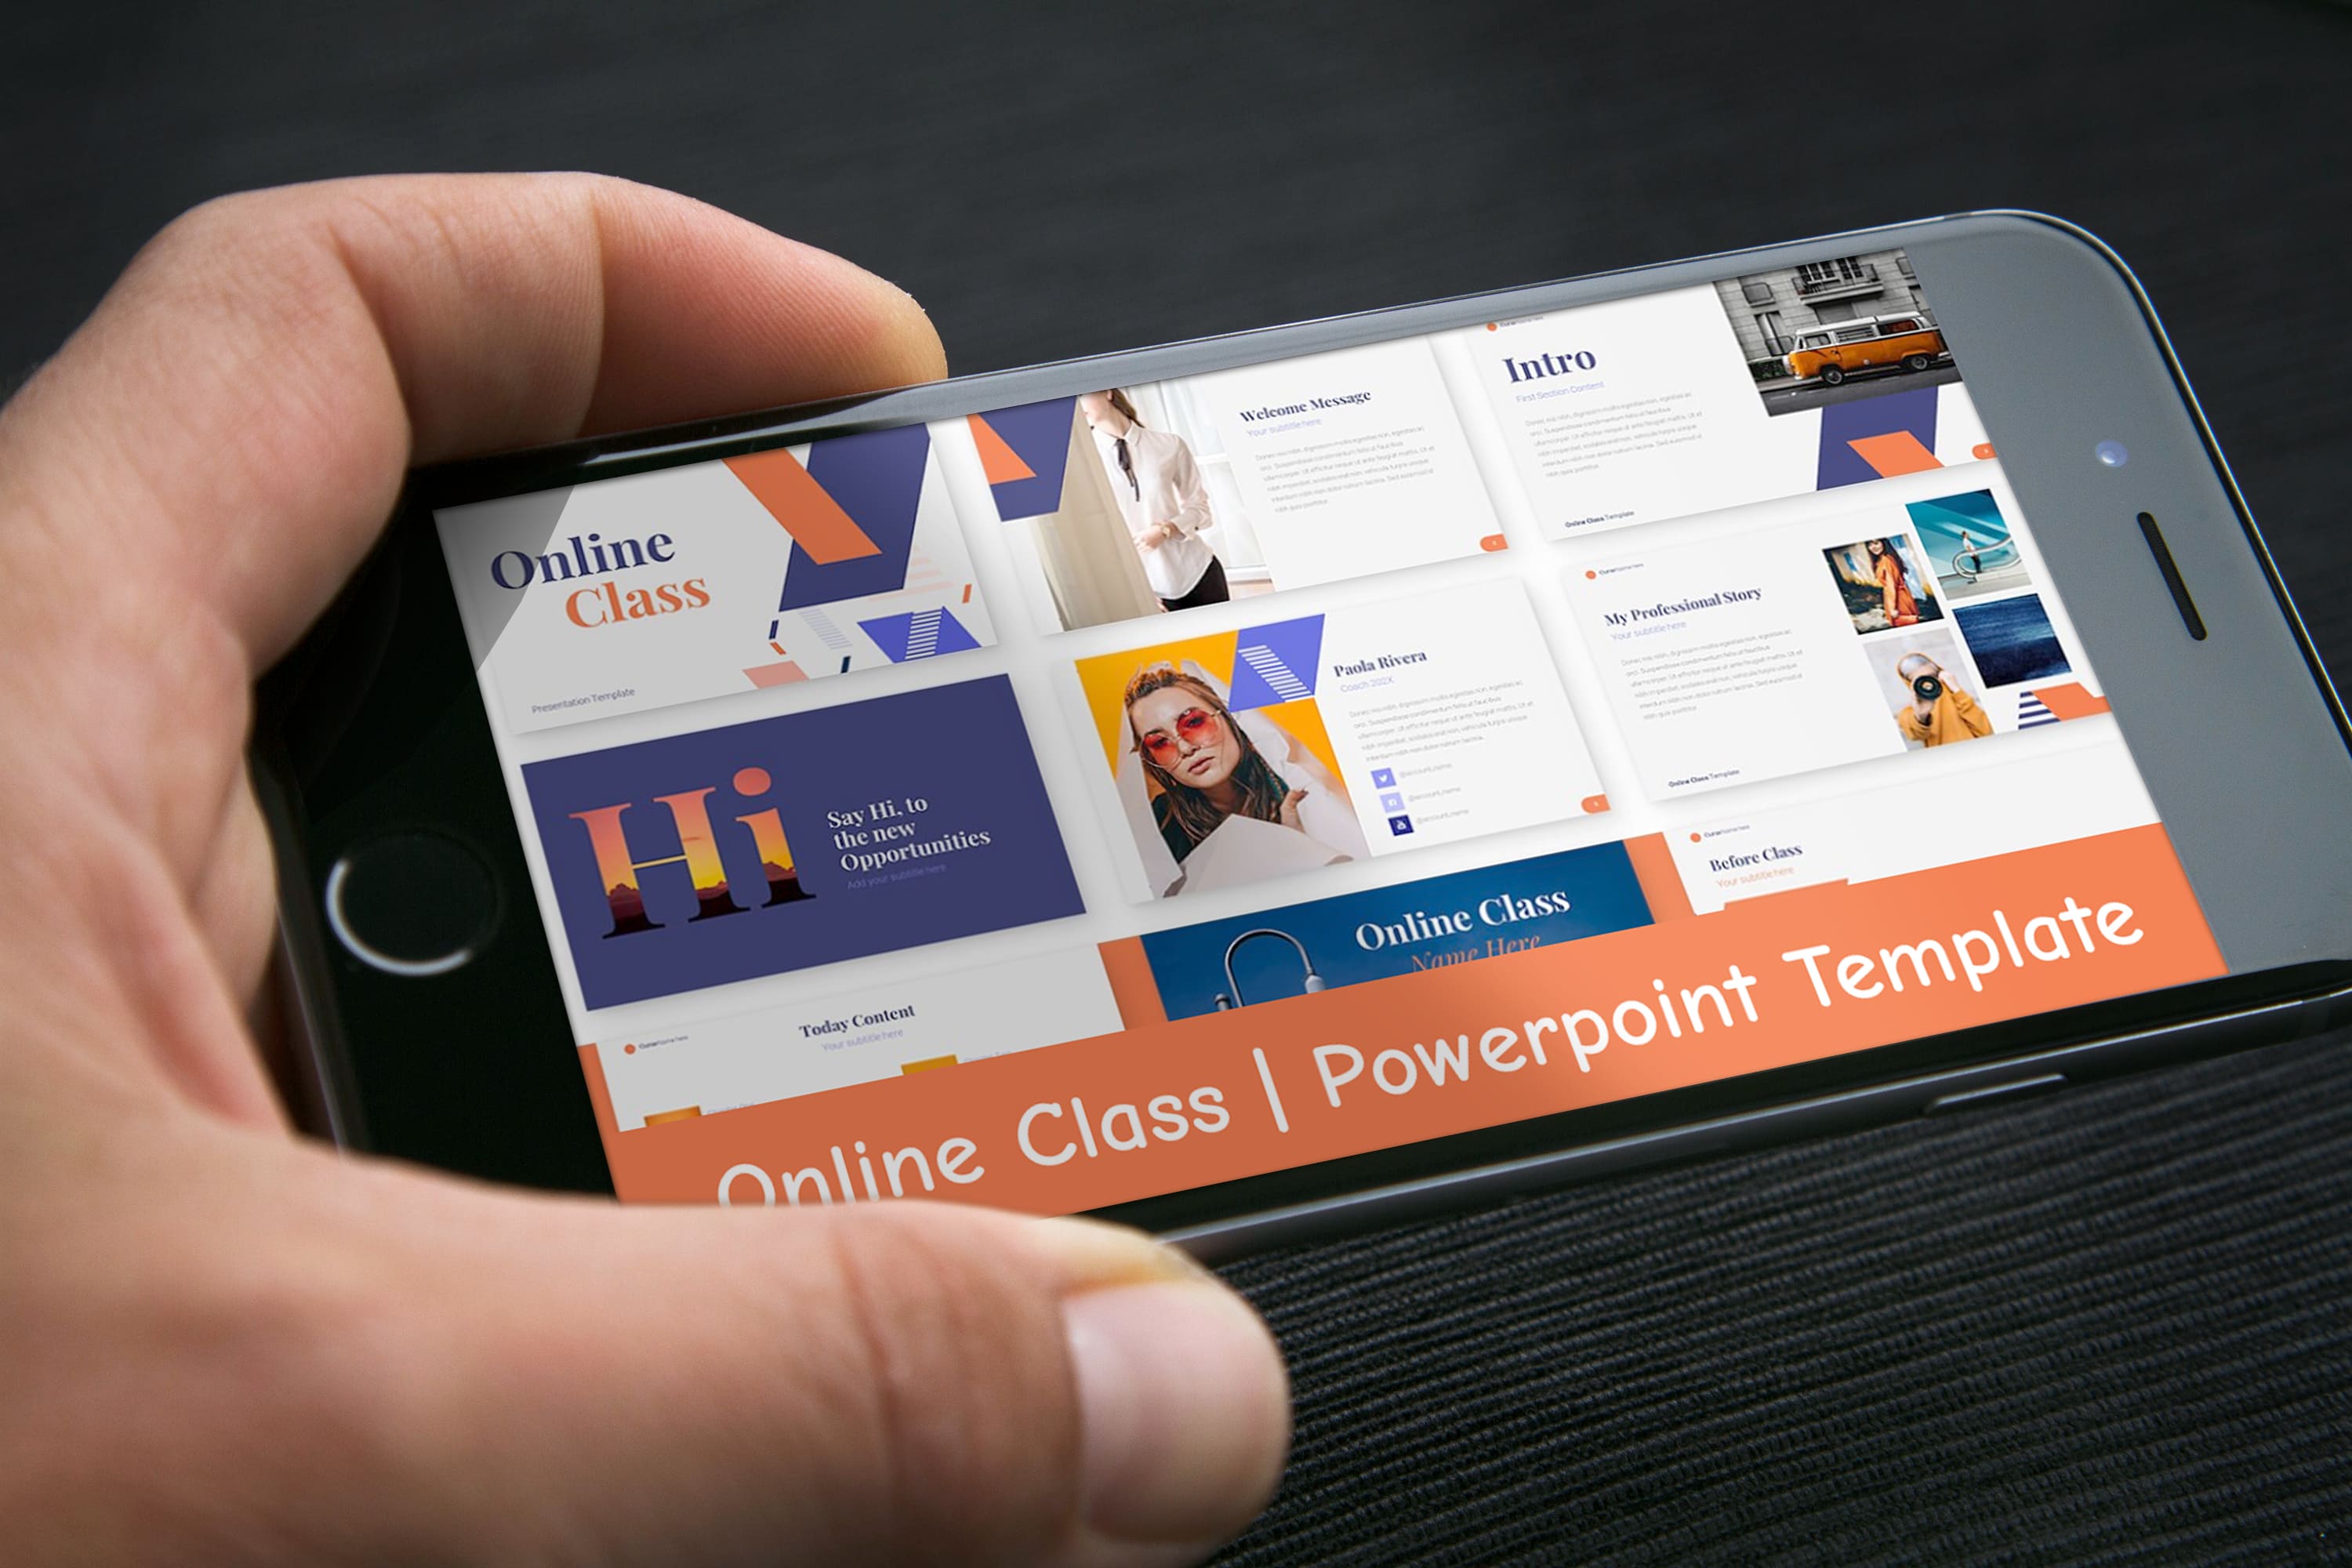 Online Class | Powerpoint Template - Mockup on Smartphone.